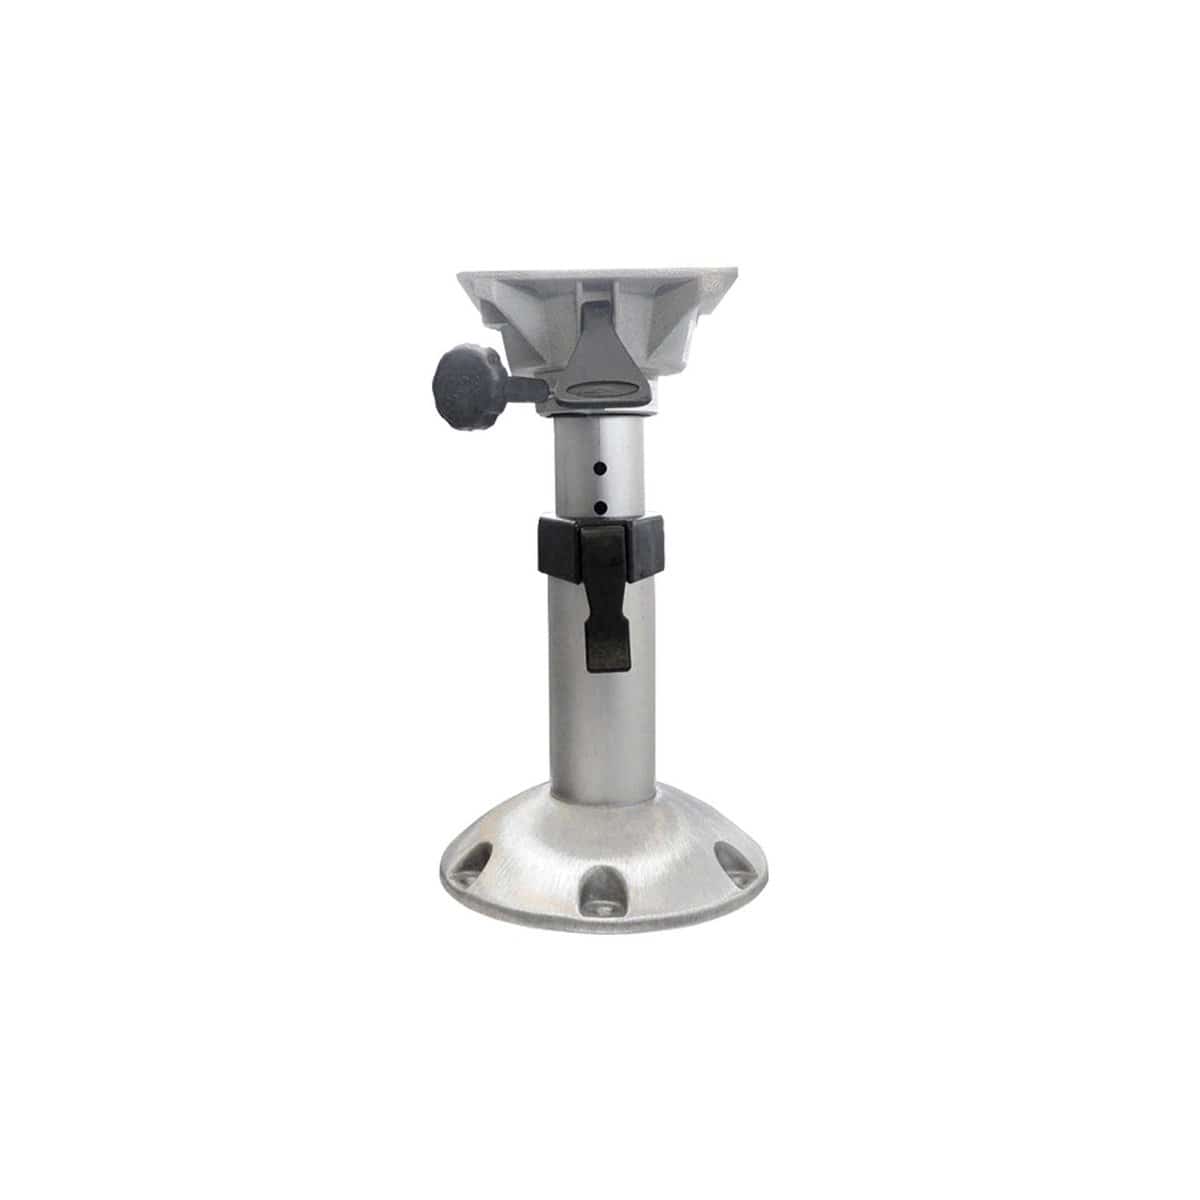 Springfield Qualifies for Free Shipping Springfield Adjustable Pedestal 13-5/8" to 16-5/8" #1253032-L1